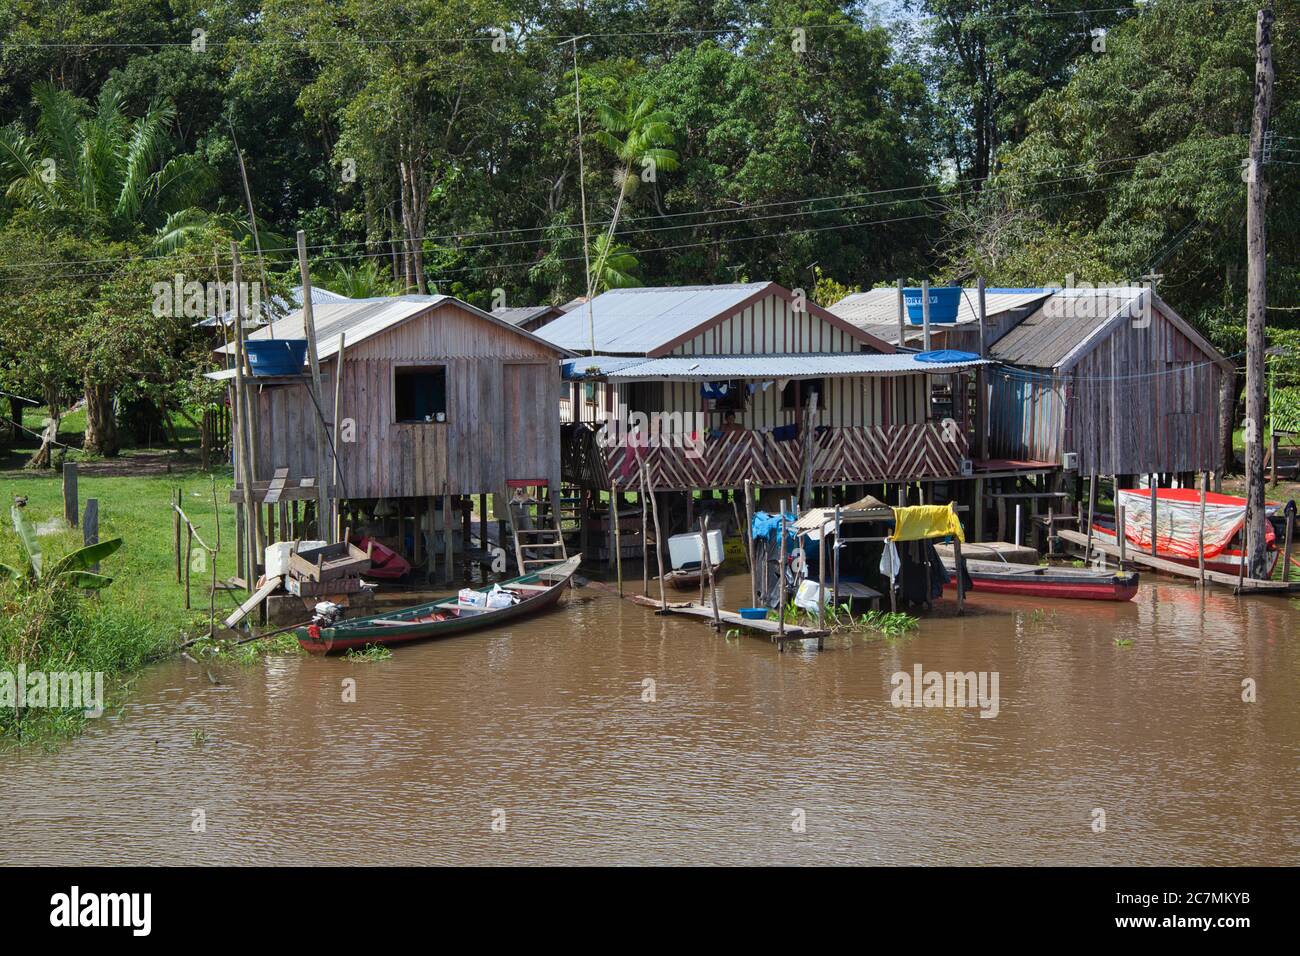 Three simple homes on stilts with jetties for boats, on the banks of the Amazon River near Manaus, Amazonas State, Brazil Stock Photo